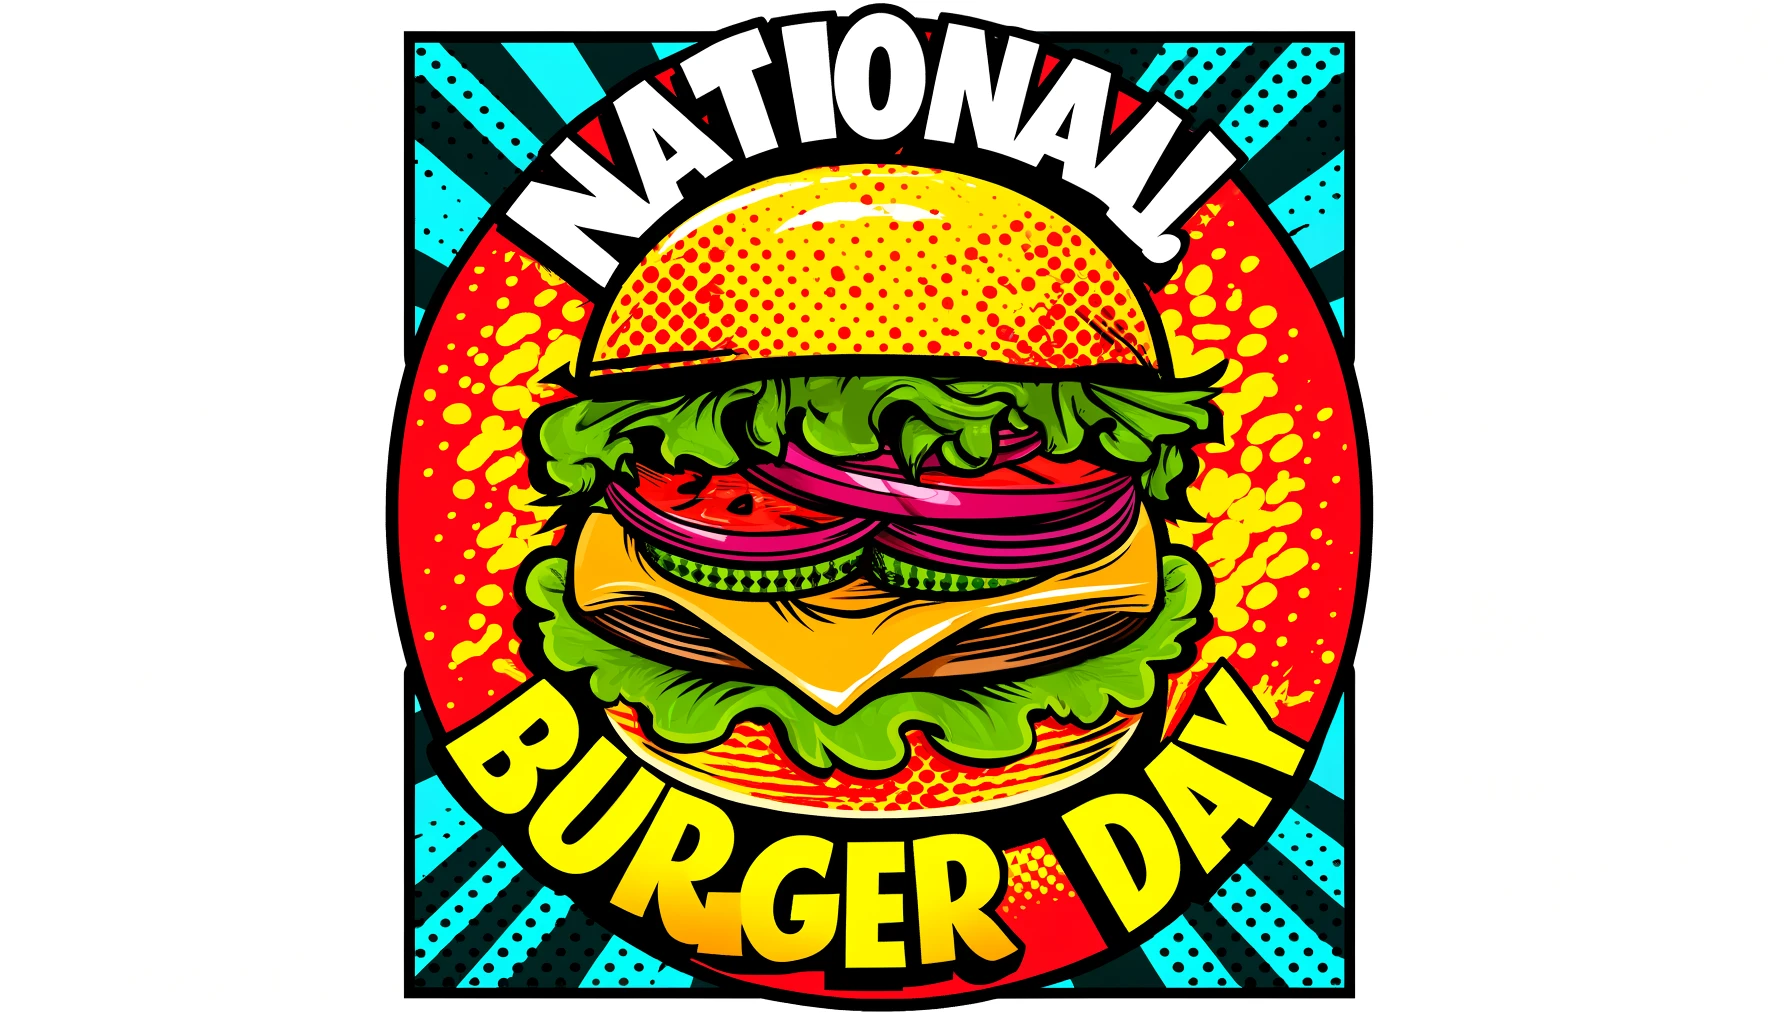 Juicy Burger Day Quotes to Share and Enjoy